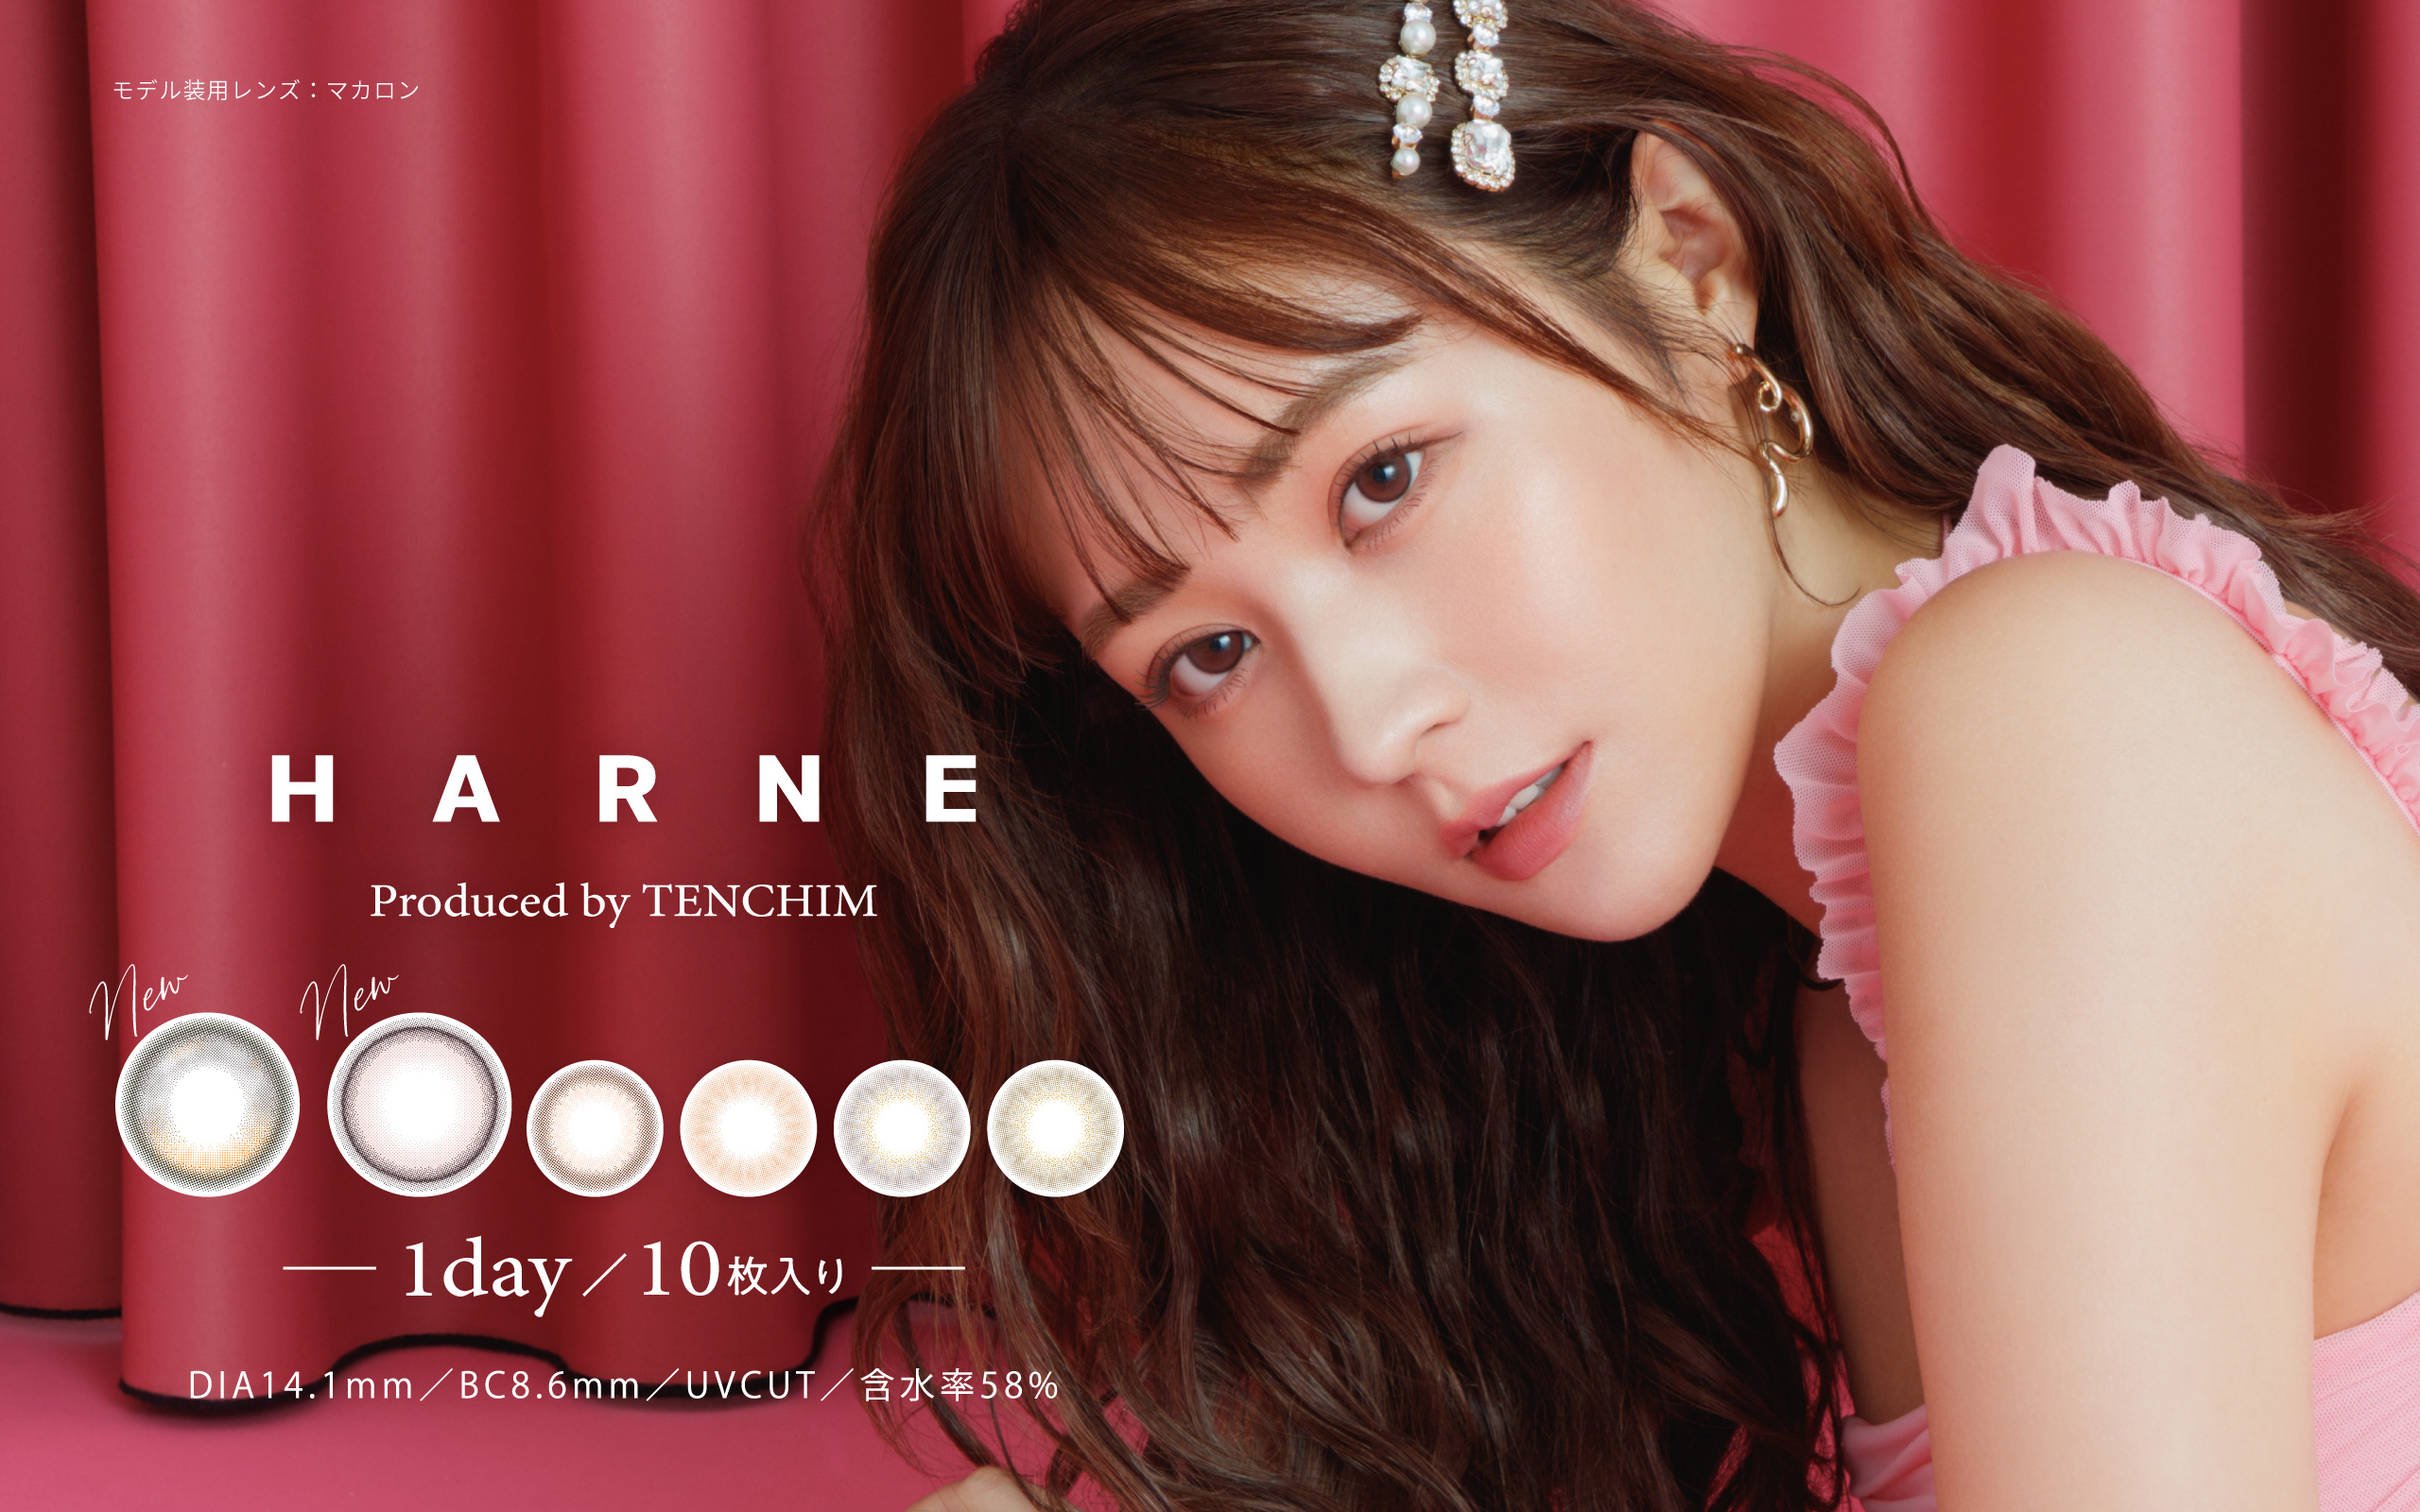 HARNE Produced by TENCHIM